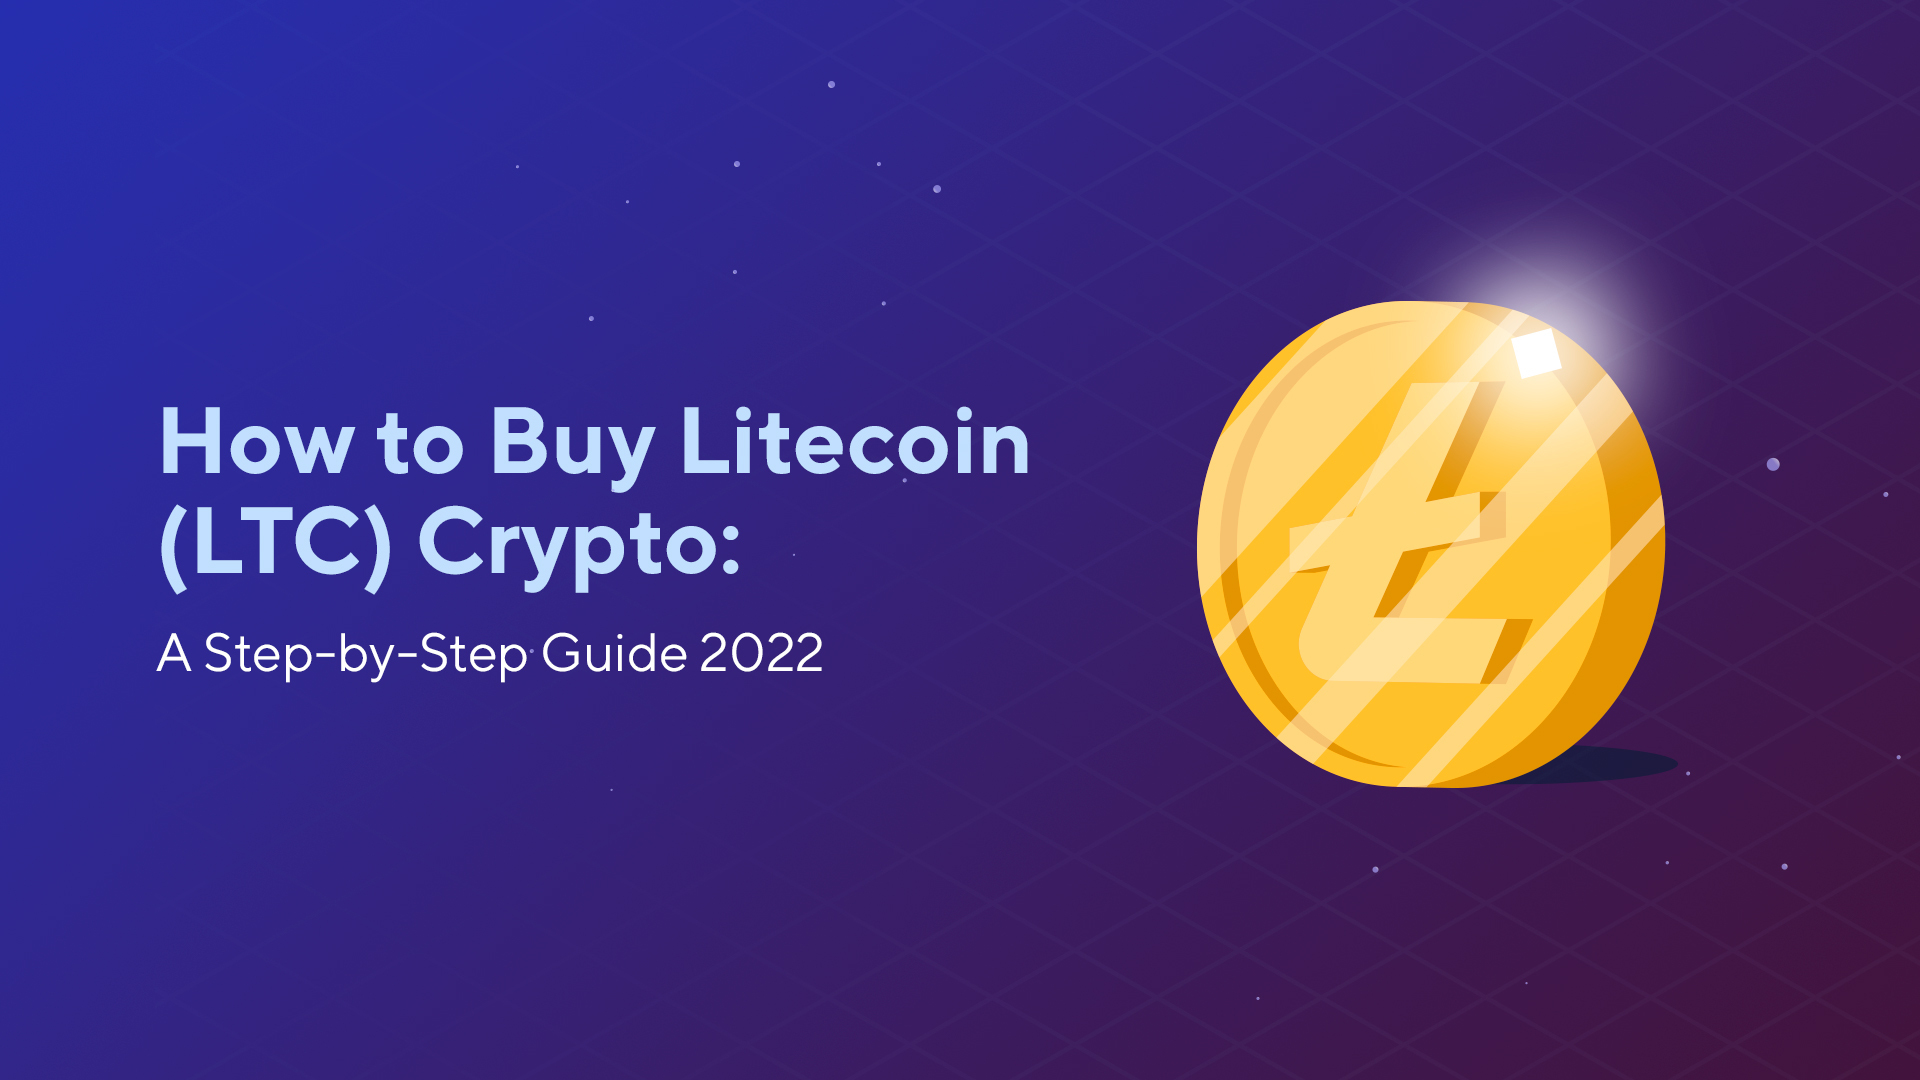 How to Buy Litecoin (LTC) Crypto: A Step-by-Step Guide 2022